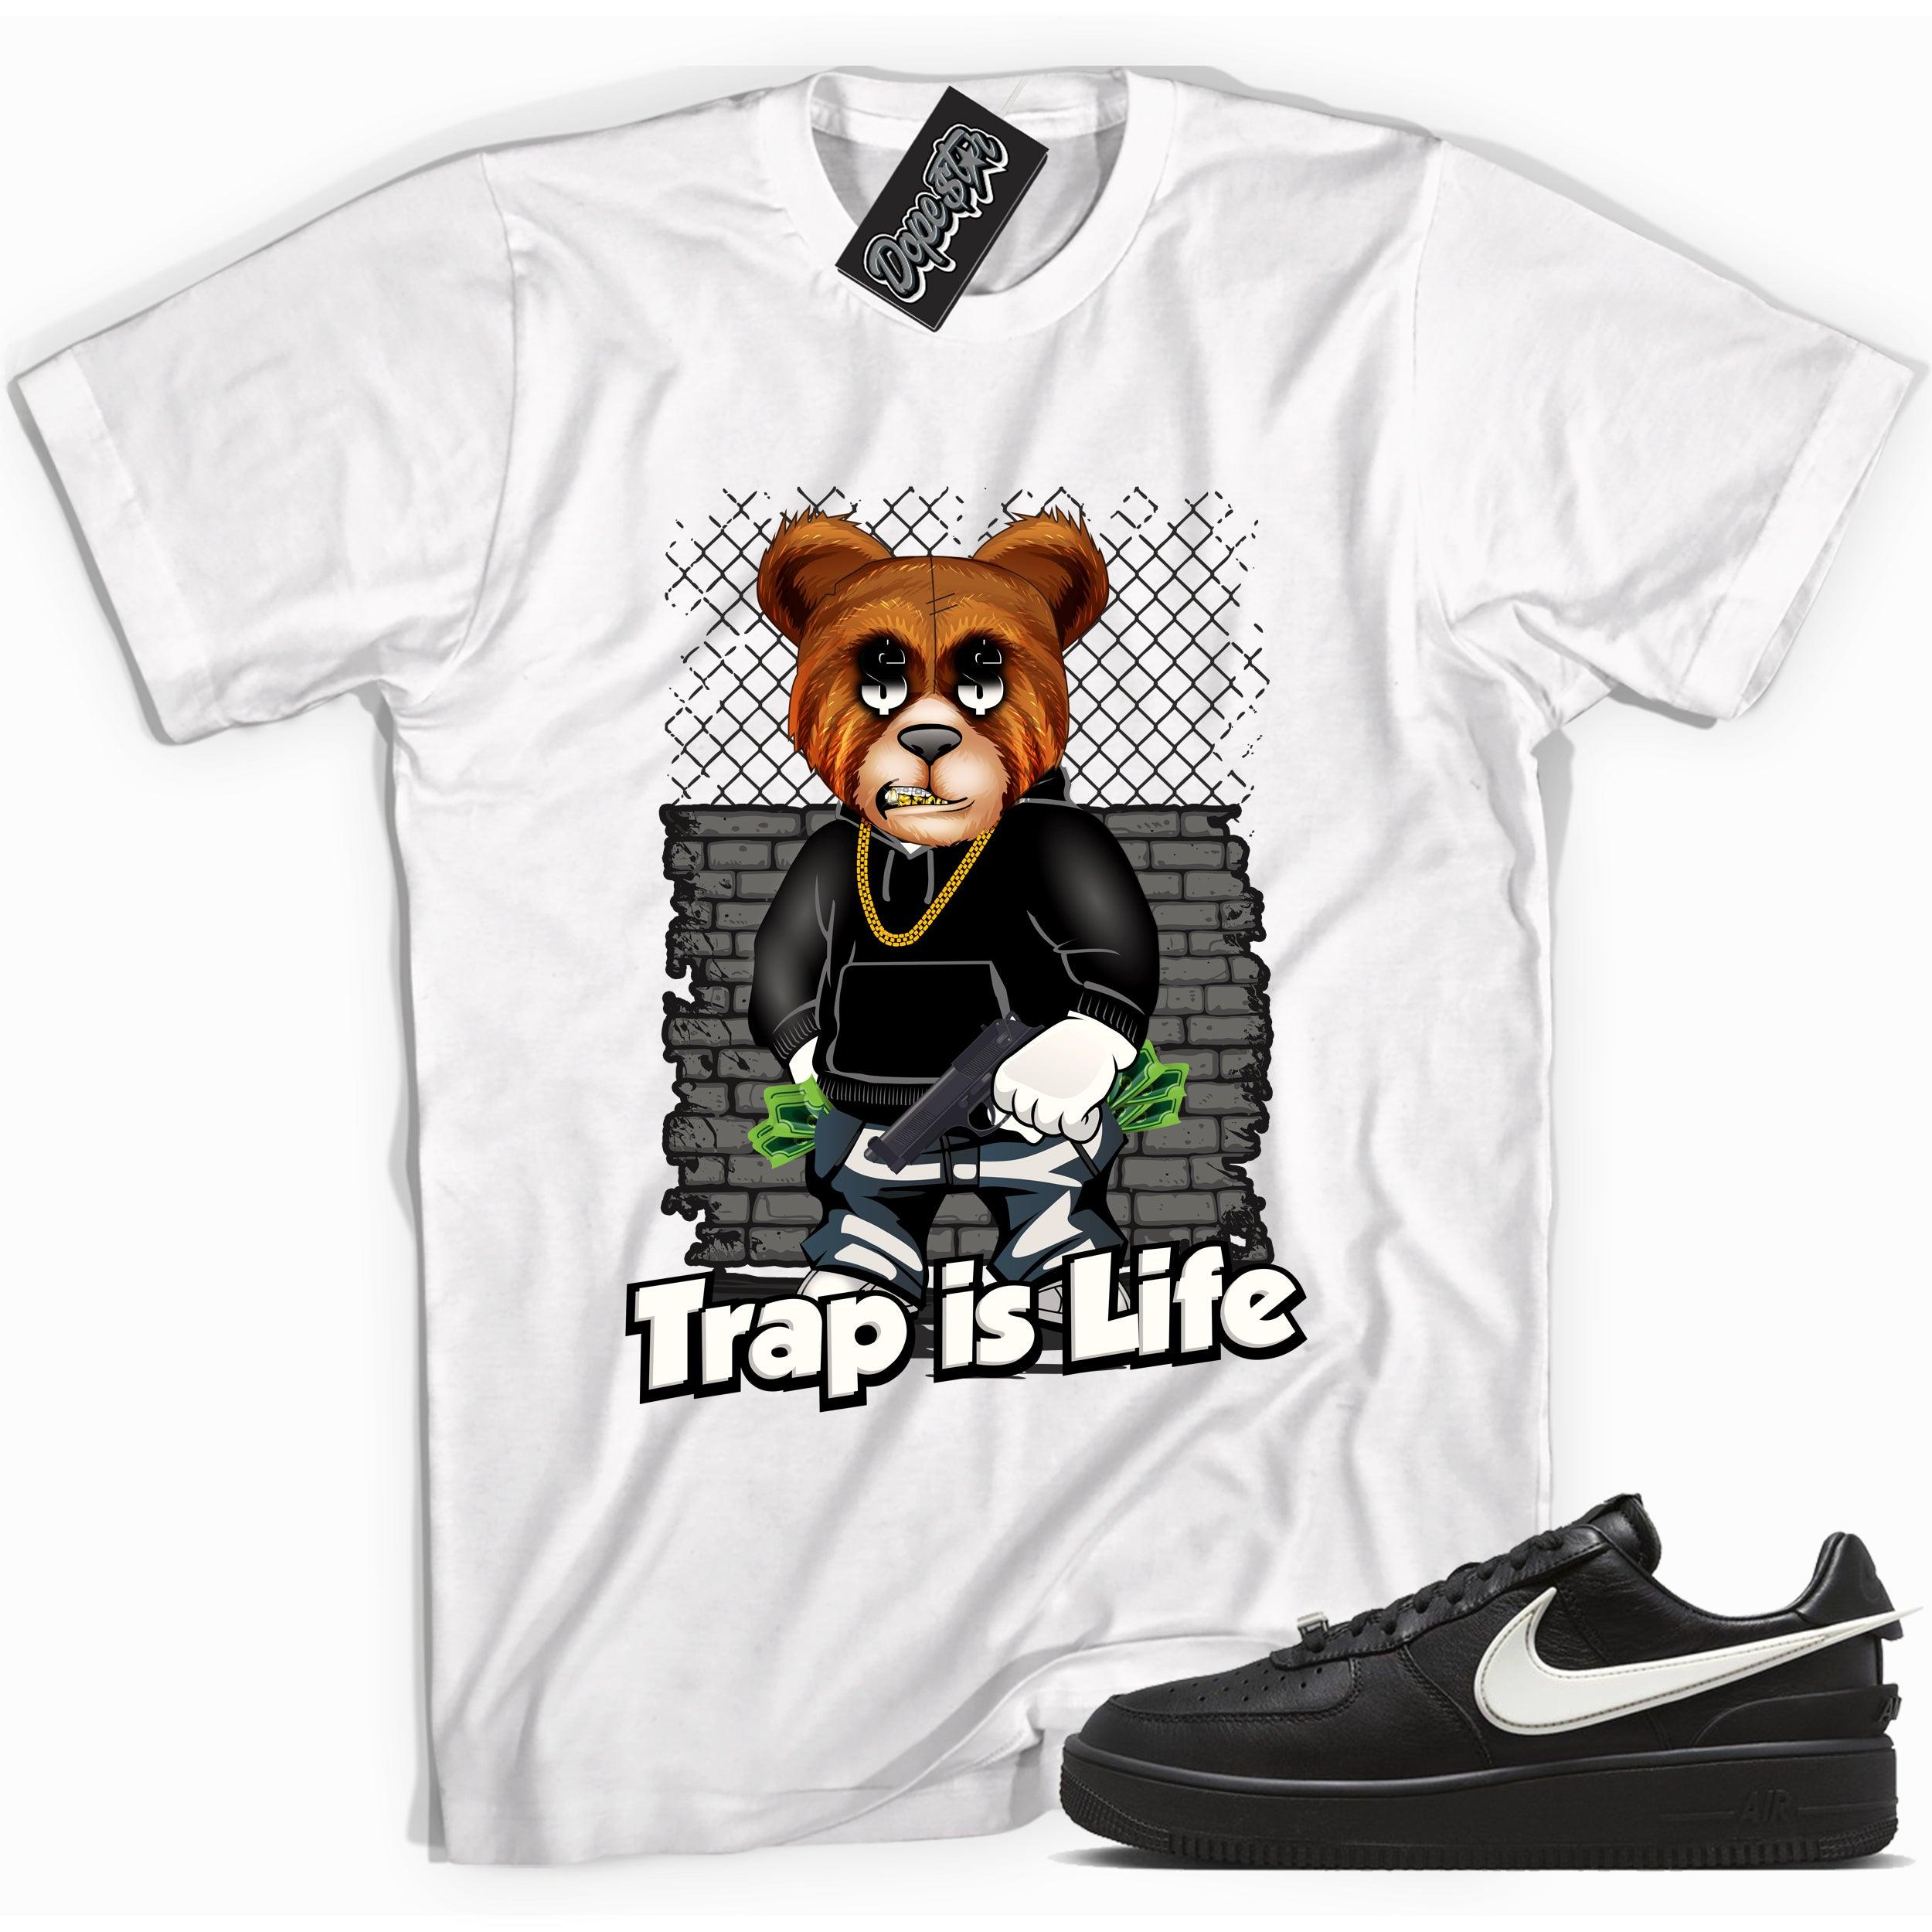 Cool white graphic tee with 'trap is life' print, that perfectly matches Nike Air Force 1 Low SP Ambush Phantom sneakers.